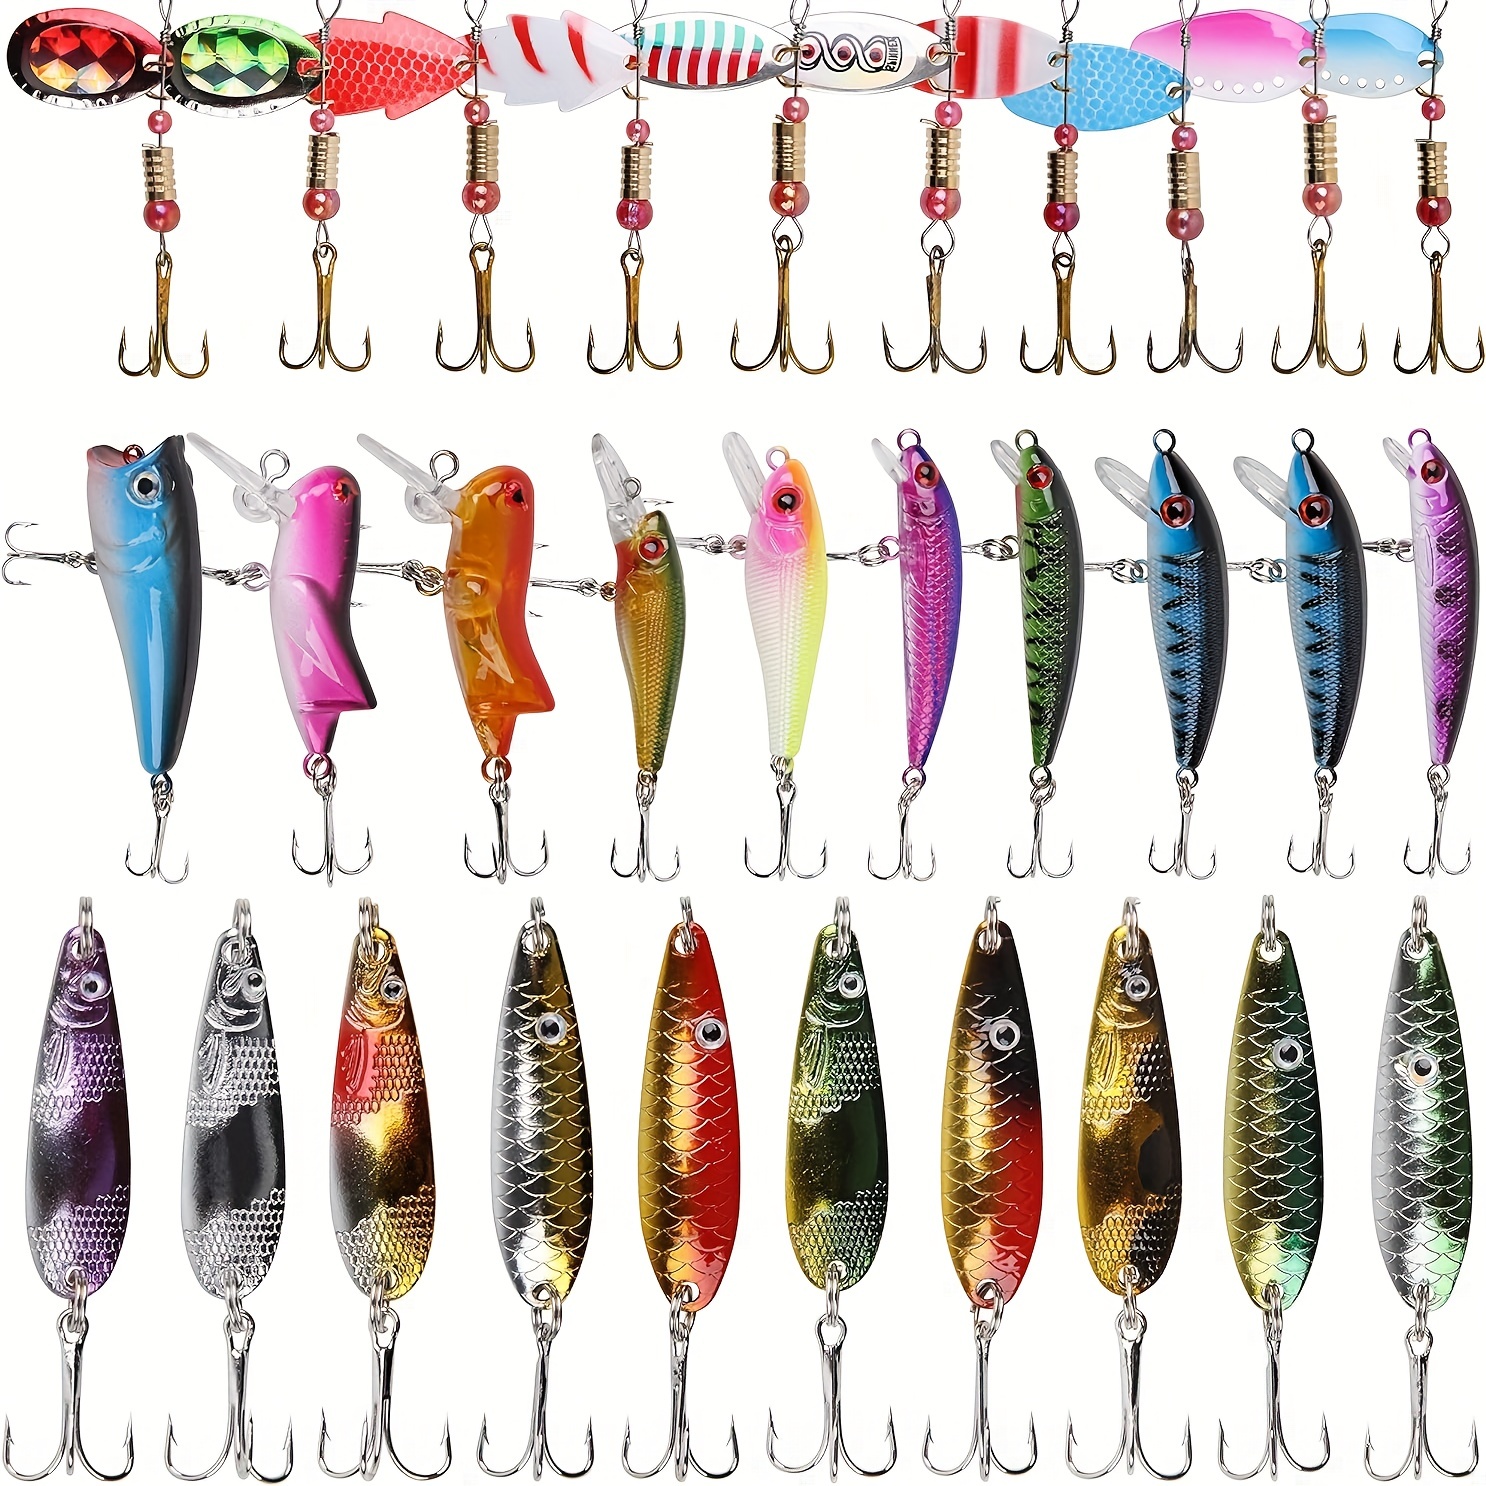 30pcs Mixed Fishing Lures With Sequin, Fishing Lure Set Kit, Minnow Fishing  Bait, Spoon Fishing Lure, Fishing Tackle